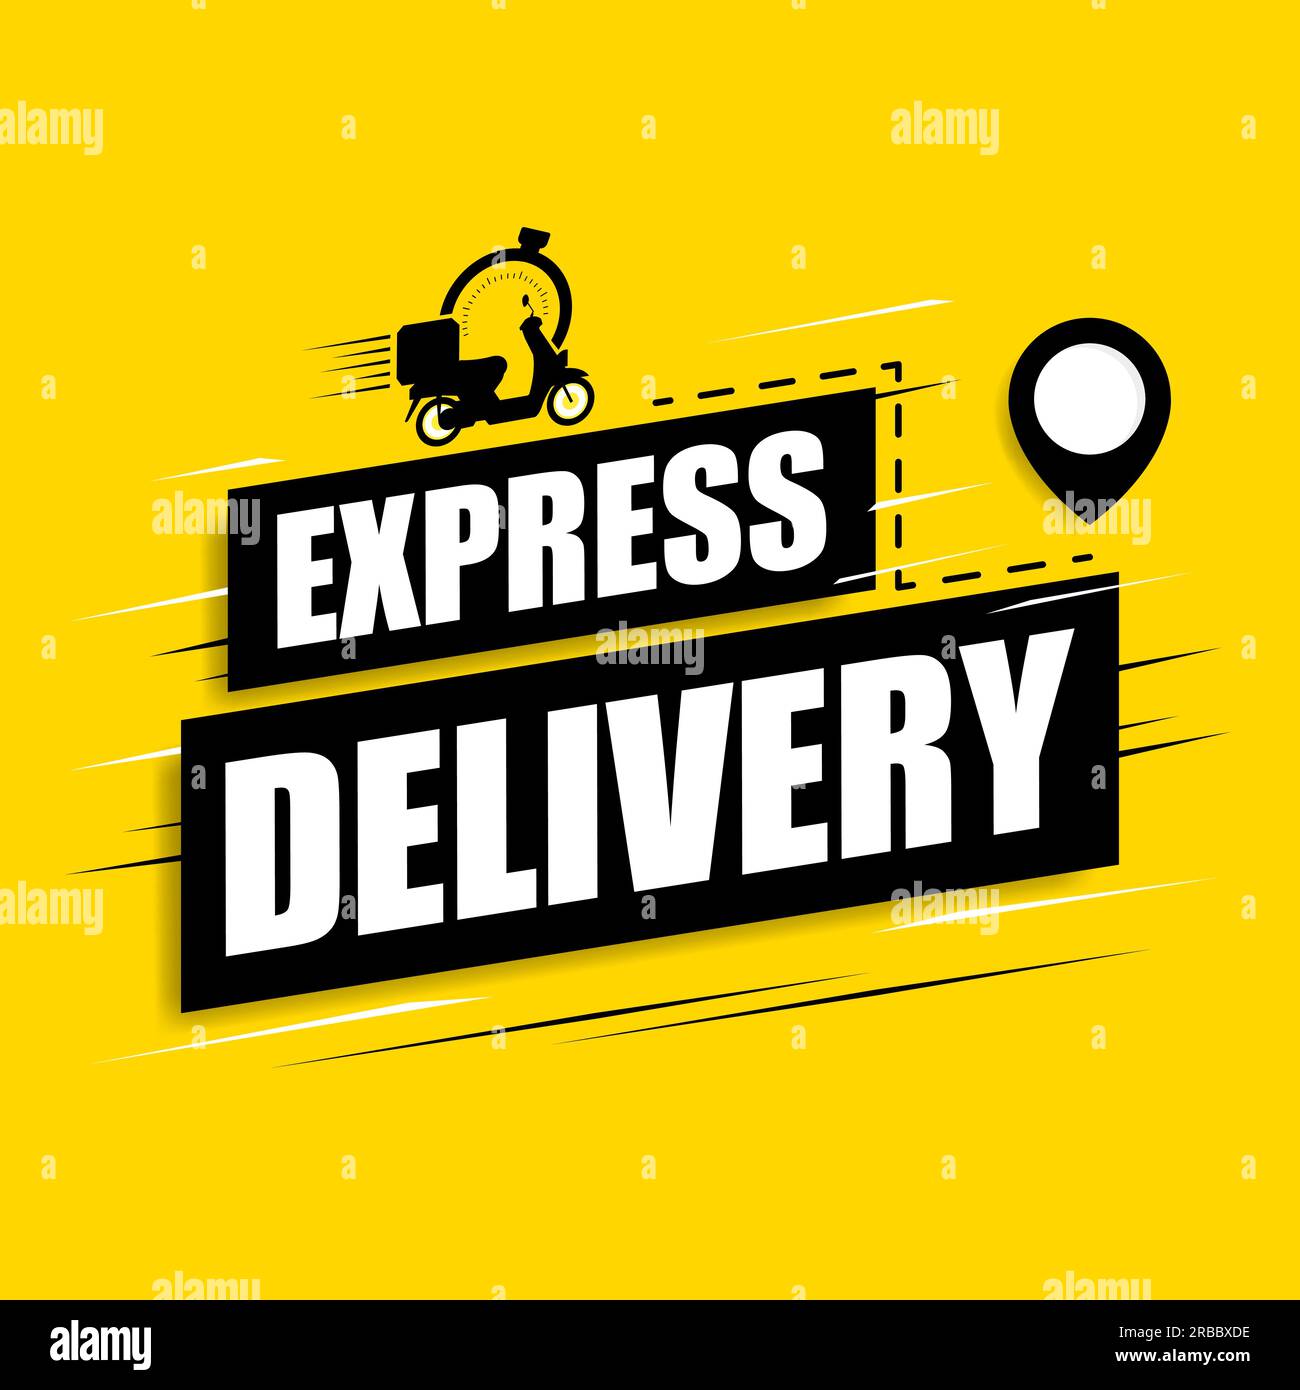 Express Delivery Icon Stock Vector Illustration and Royalty Free